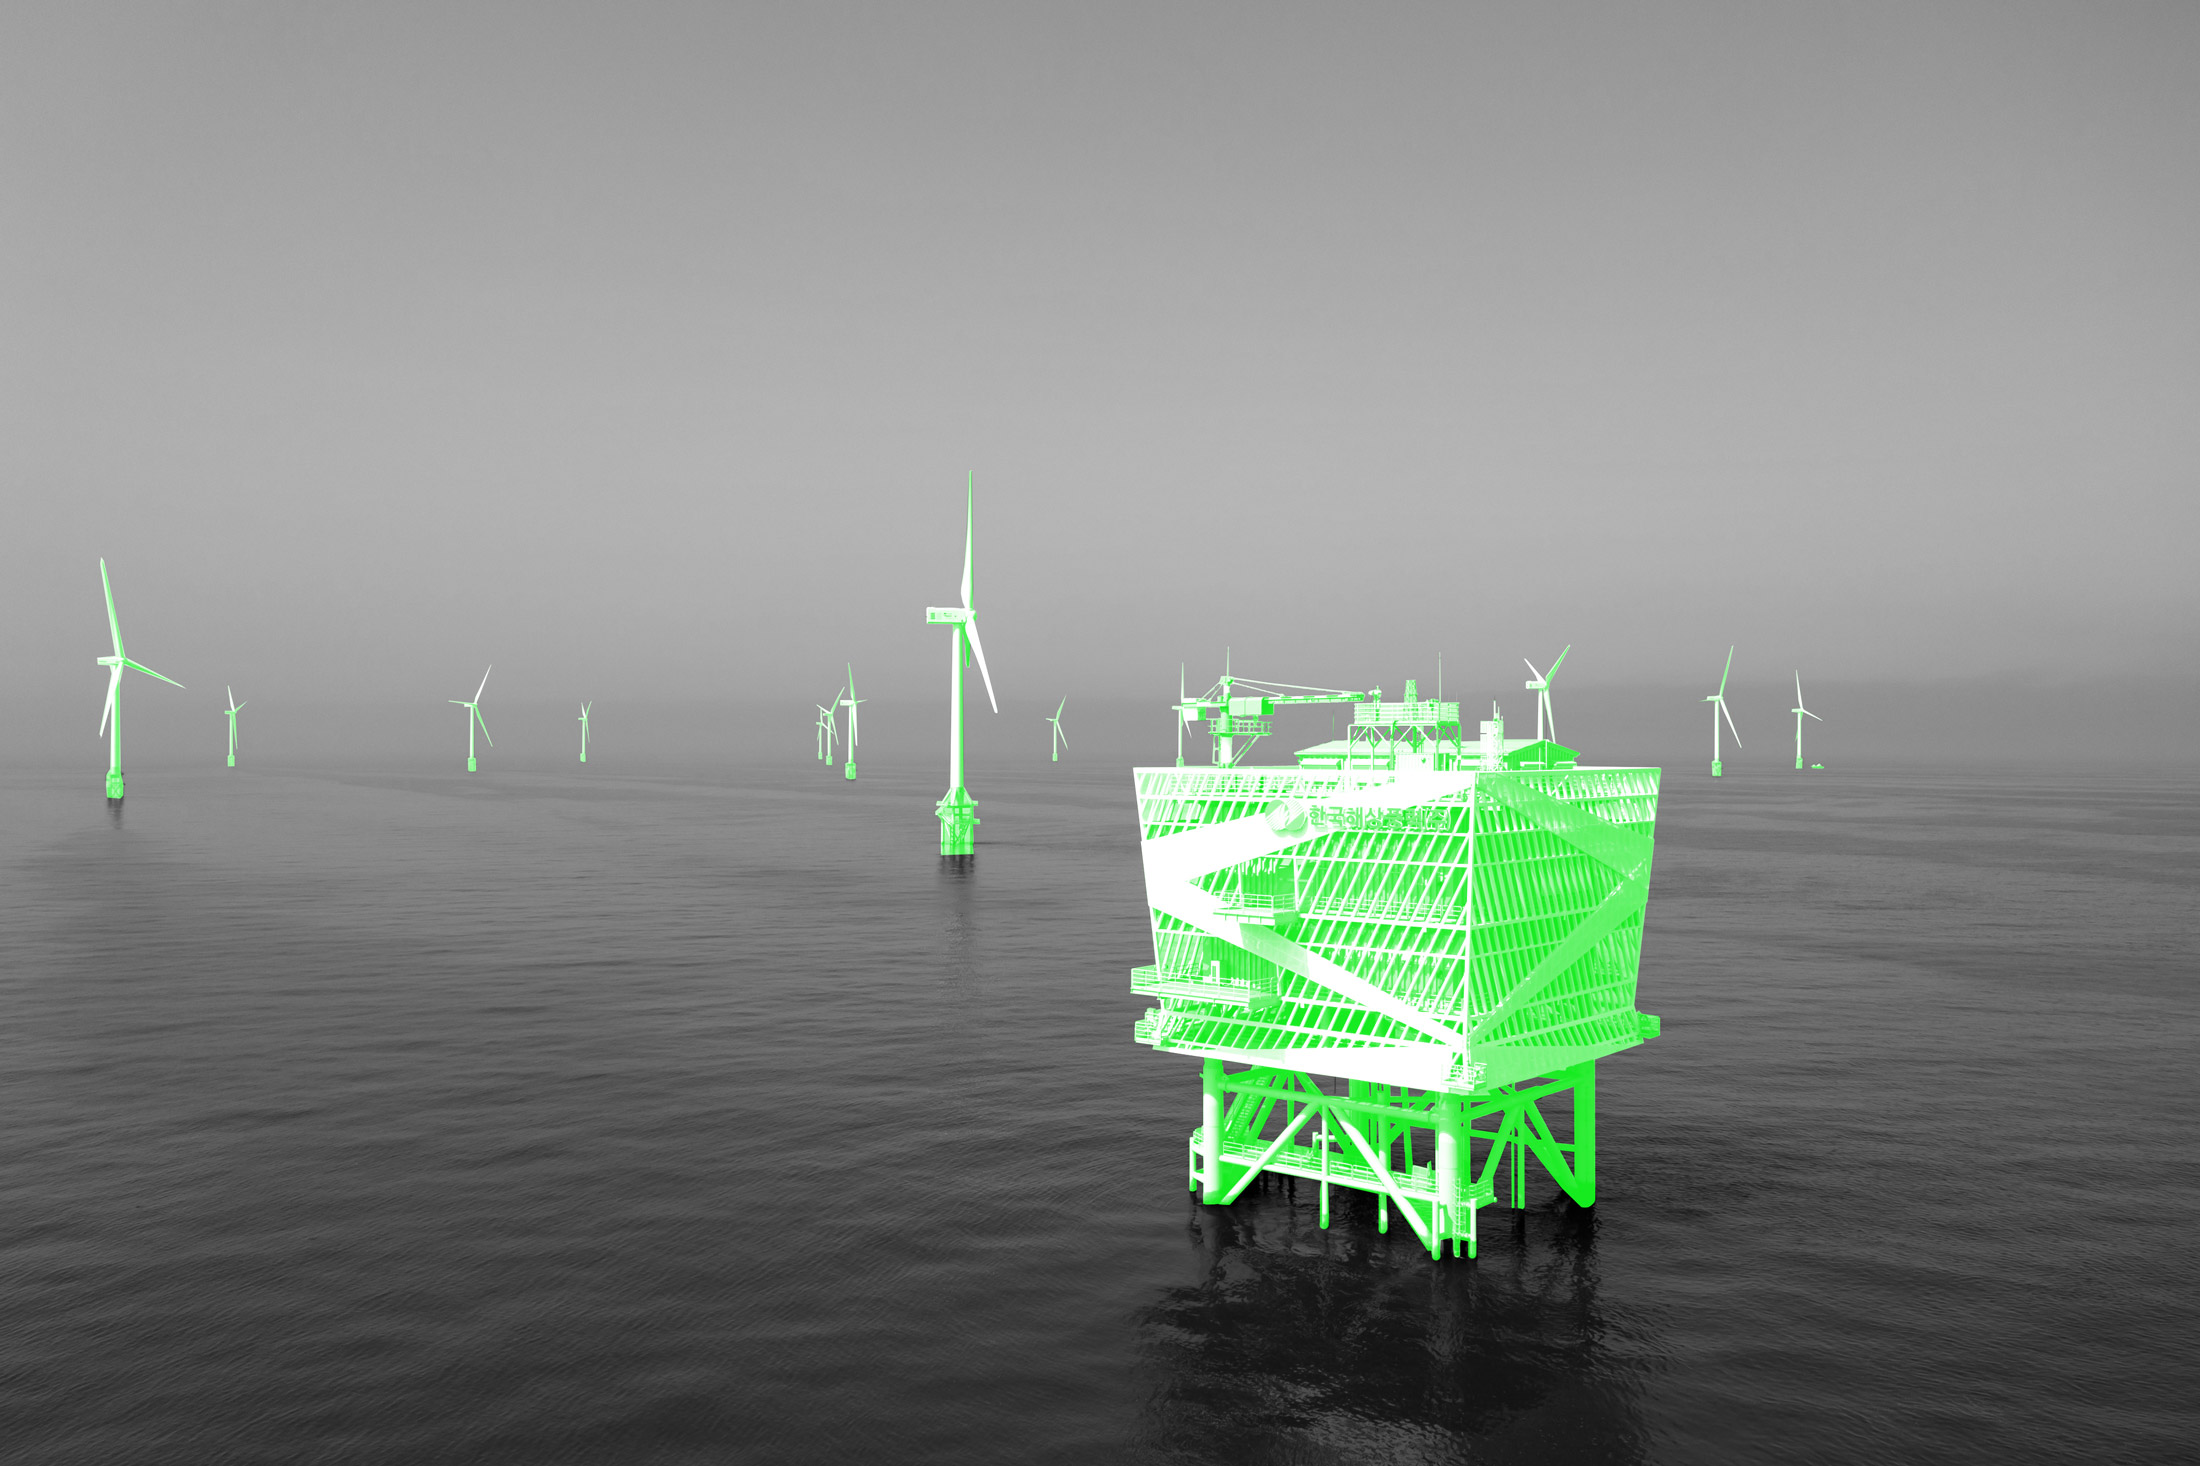 The offshore substation collects and sends out electricity produced from 20 wind turbines in the Southwest Sea.